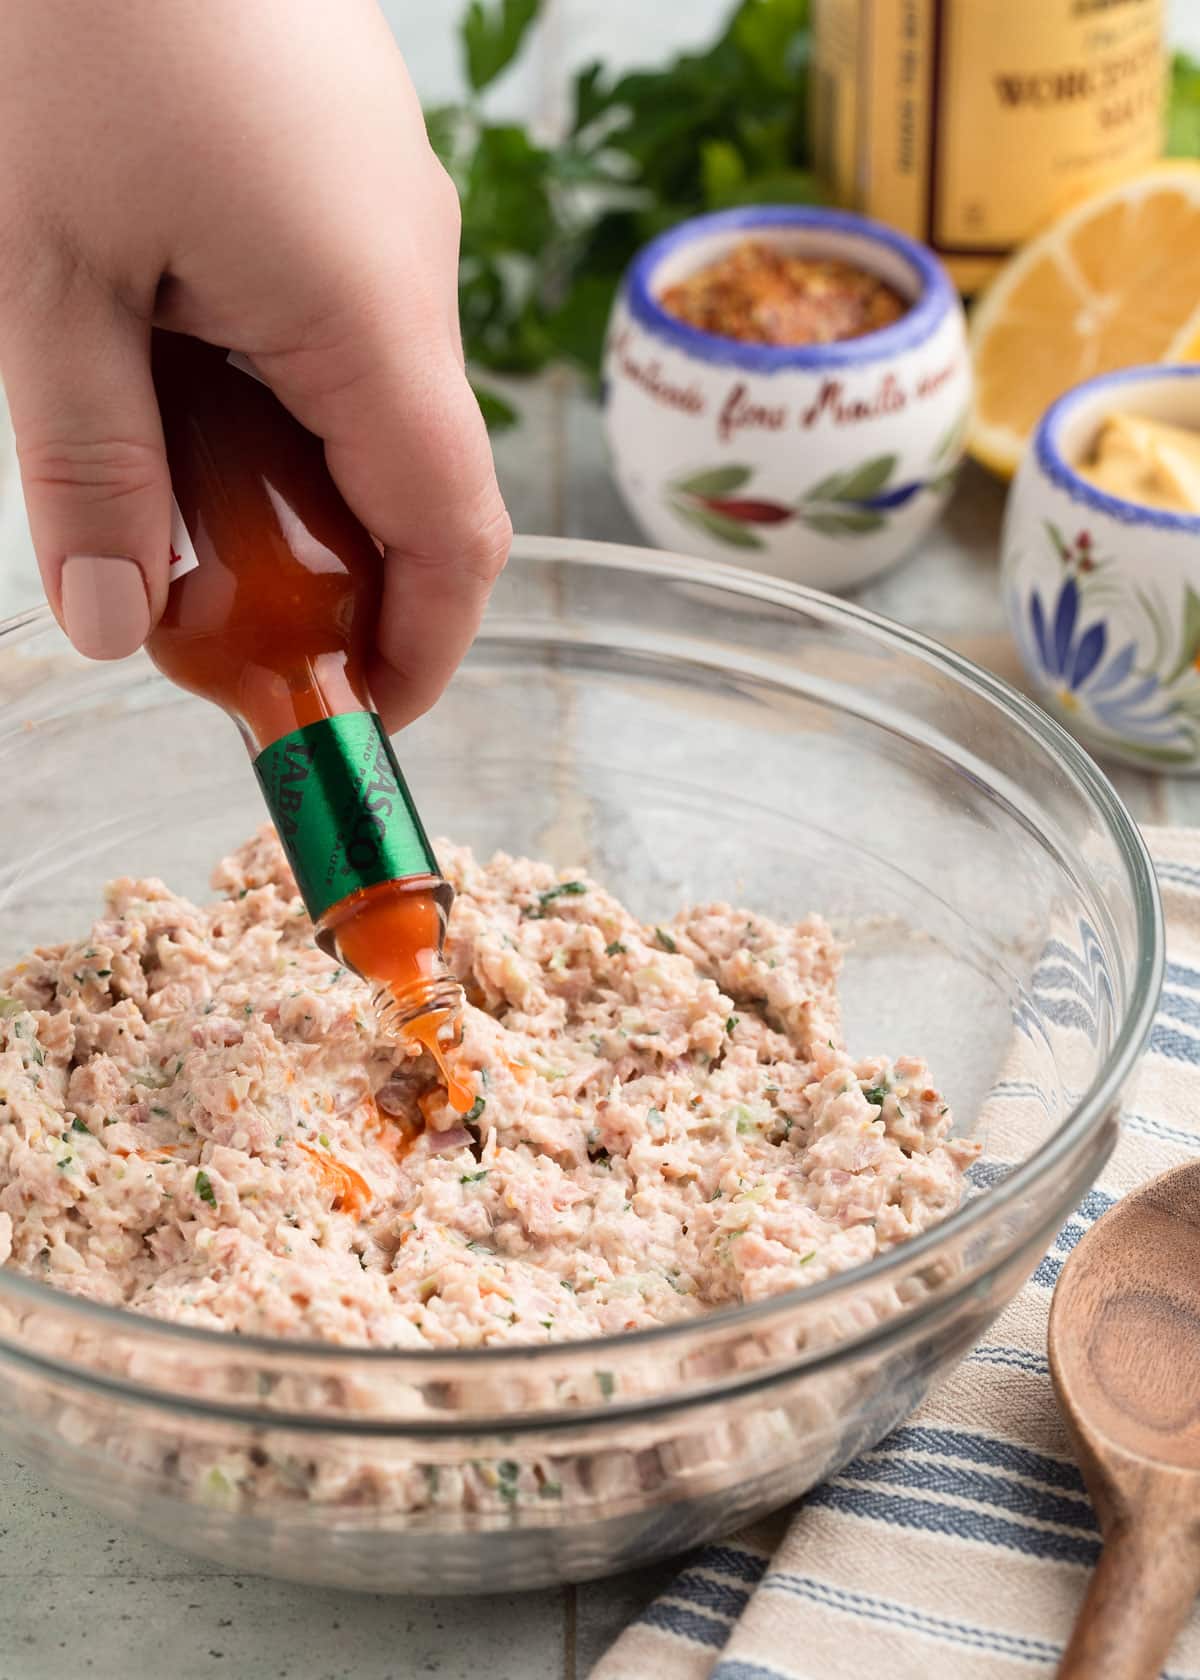 shaking hot sauce from a small glass bottle into a glass bowl of Deviled Ham spread